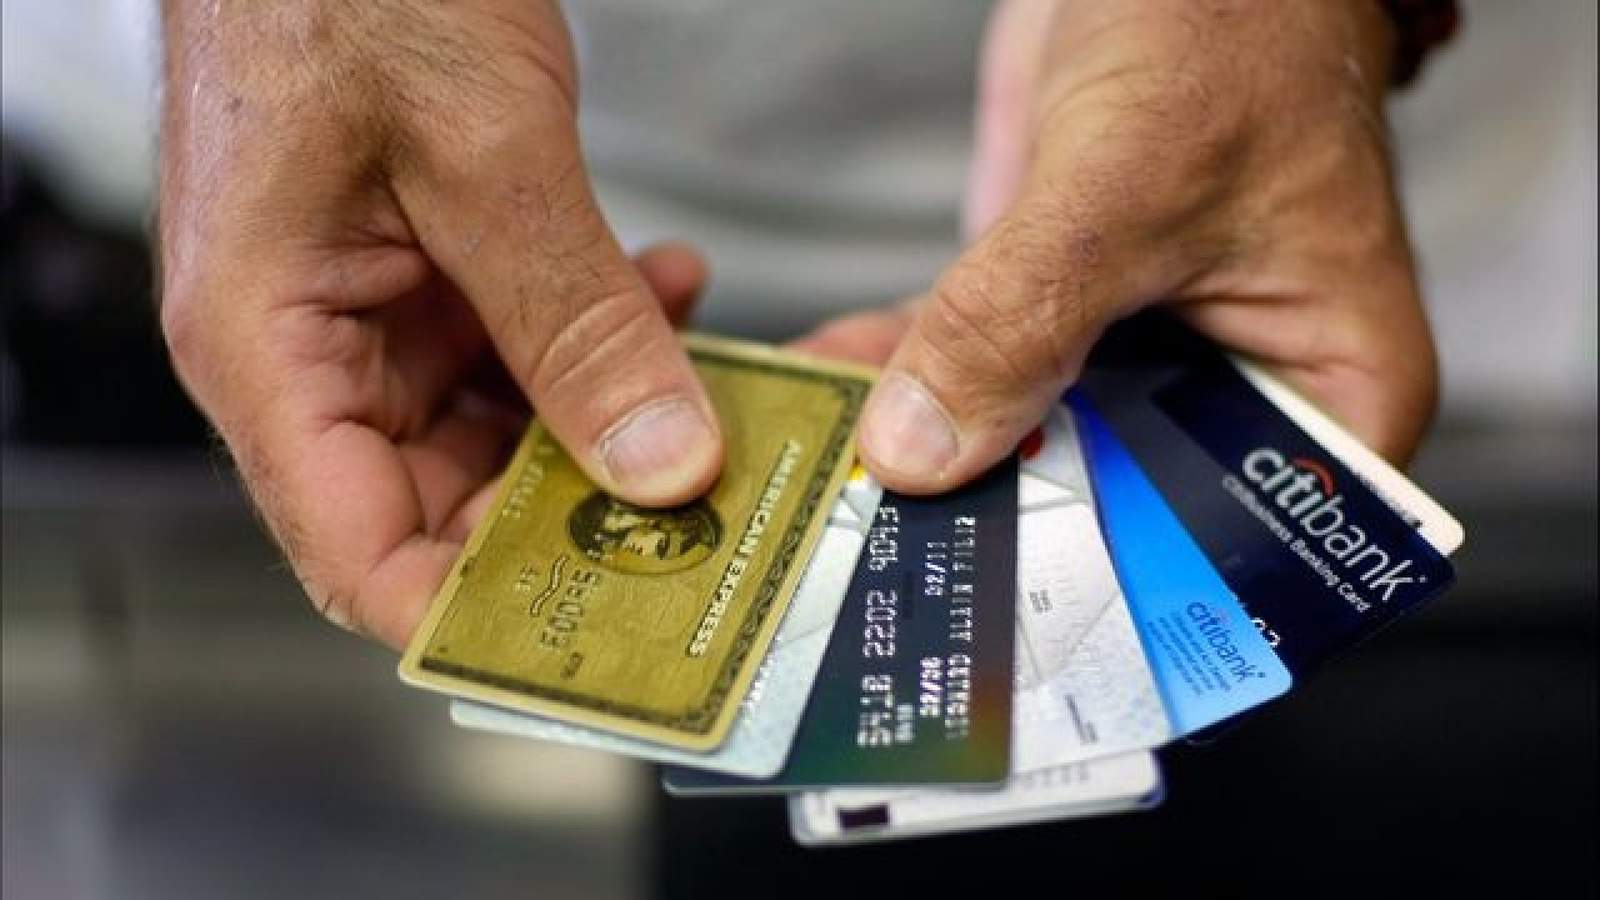 For some, credit cards are a major part of tax season, survey finds